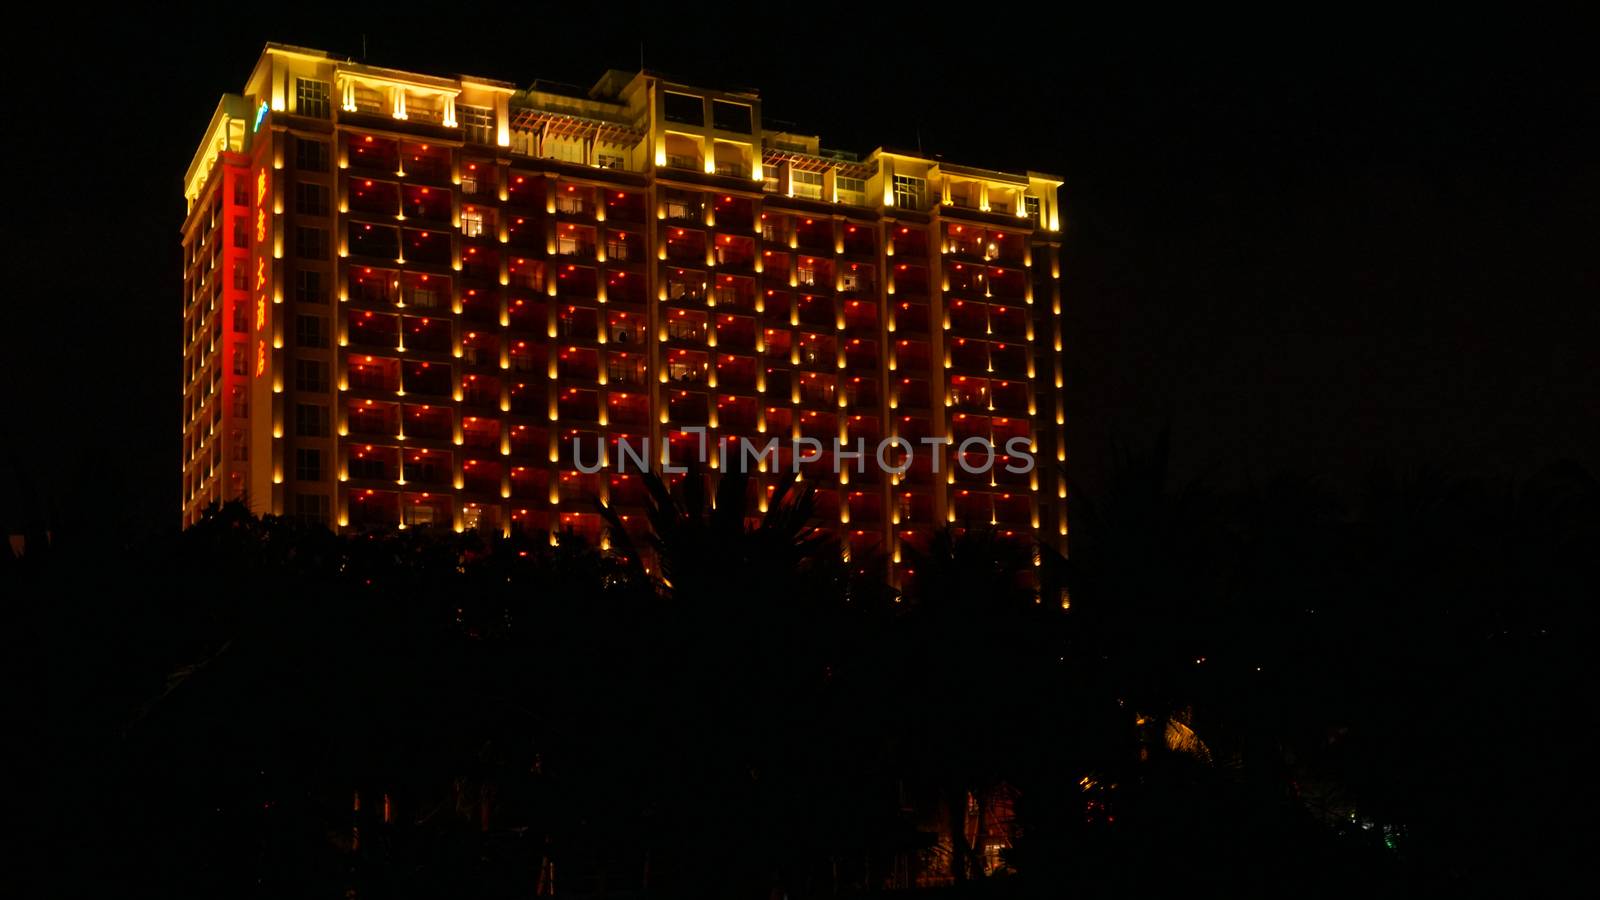 The night scene of office building or hotel with lights by natali_brill